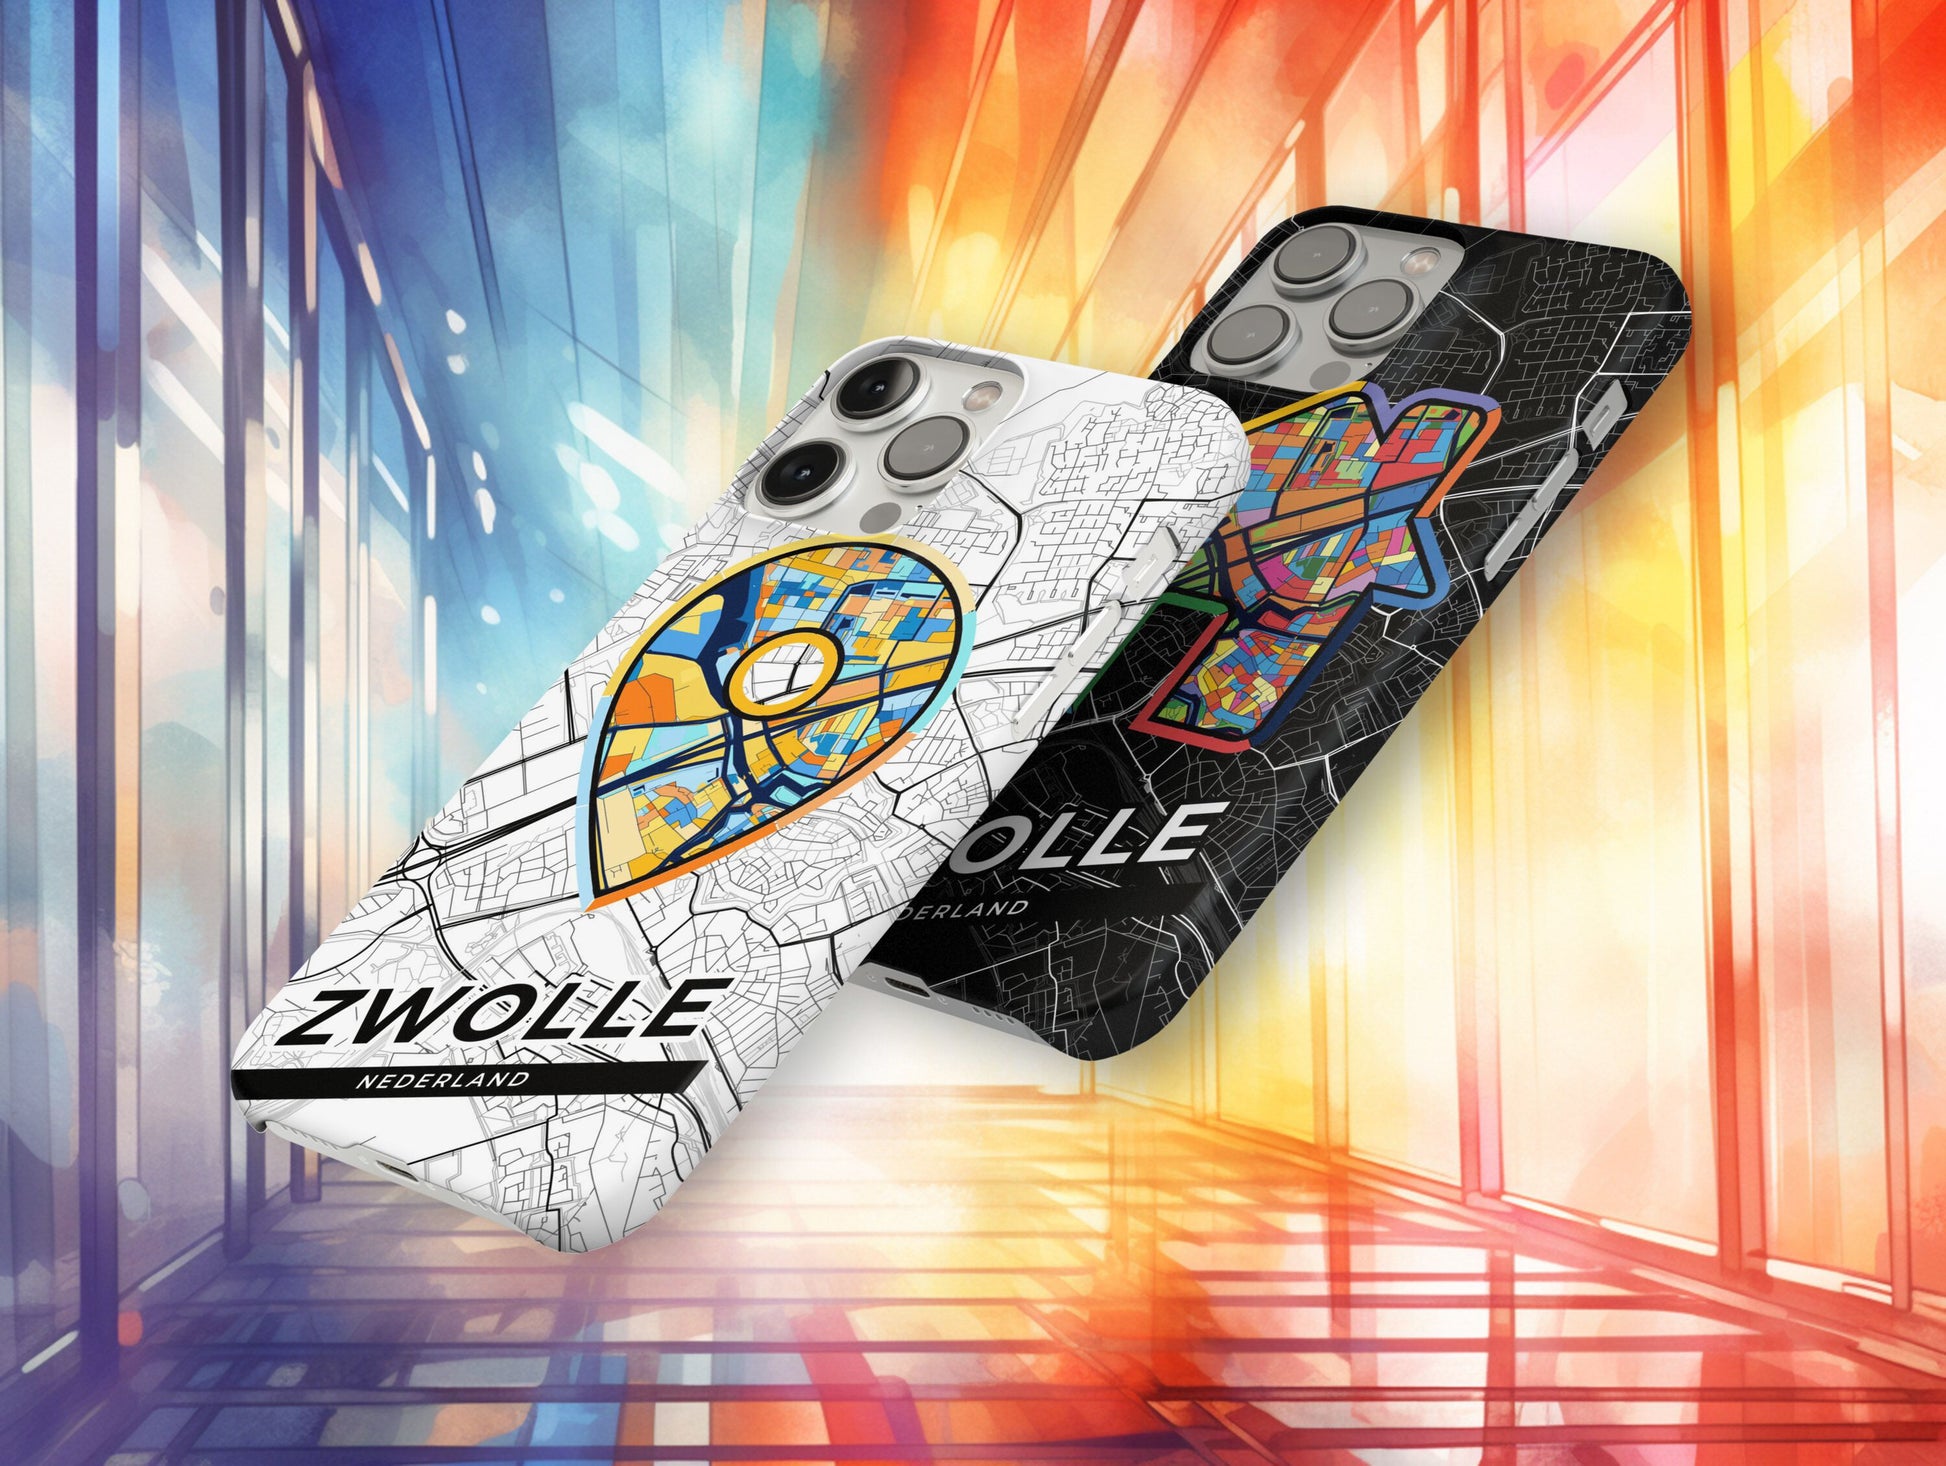 Zwolle Netherlands slim phone case with colorful icon